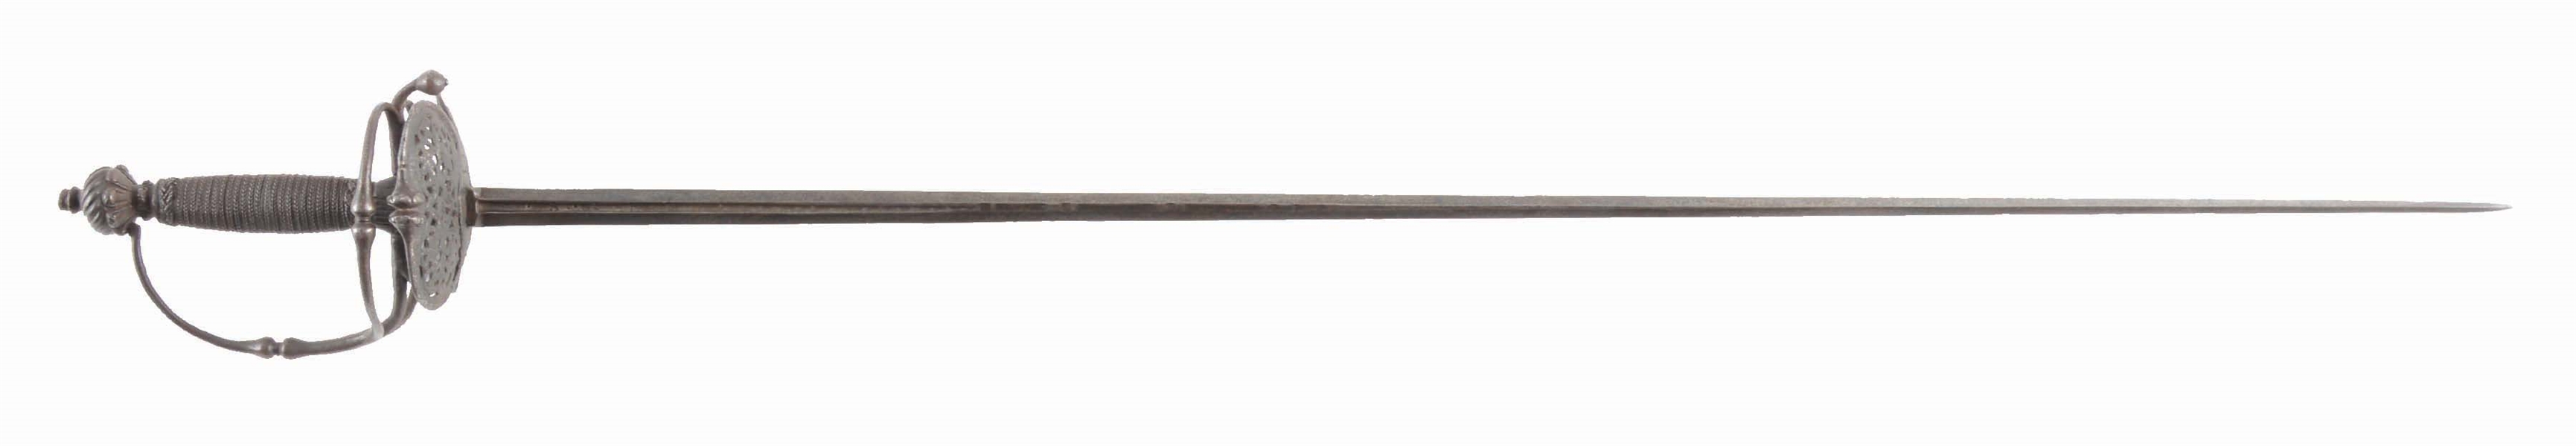 A GOOD CONTINENTAL TRANSITIONAL RAPIER, THIRD QUARTER OF THE 17TH CENTURY WITH PIERCED GUARD AND LONG 34 - 1/2" BLADE WITH ABHD STAMPED ON BOTH SIDES IN THE FULLER, FLUTED POMMEL WITH ELABORATE WIRE. 